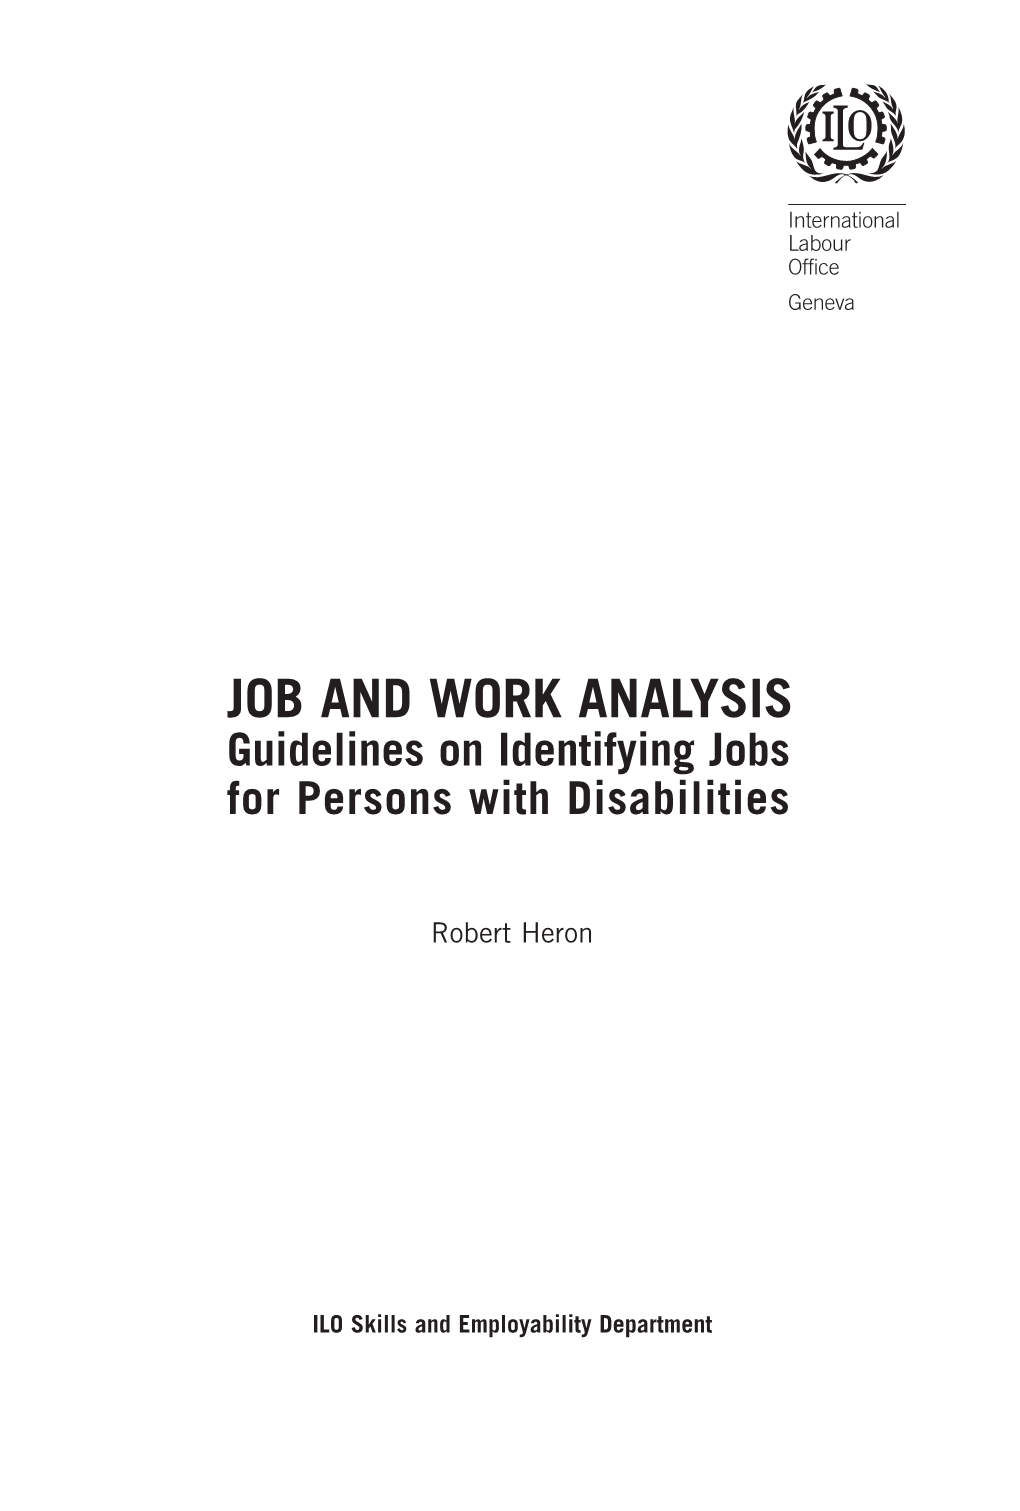 JOB and WORK ANALYSIS Guidelines on Identifying Jobs for Persons with Disabilities